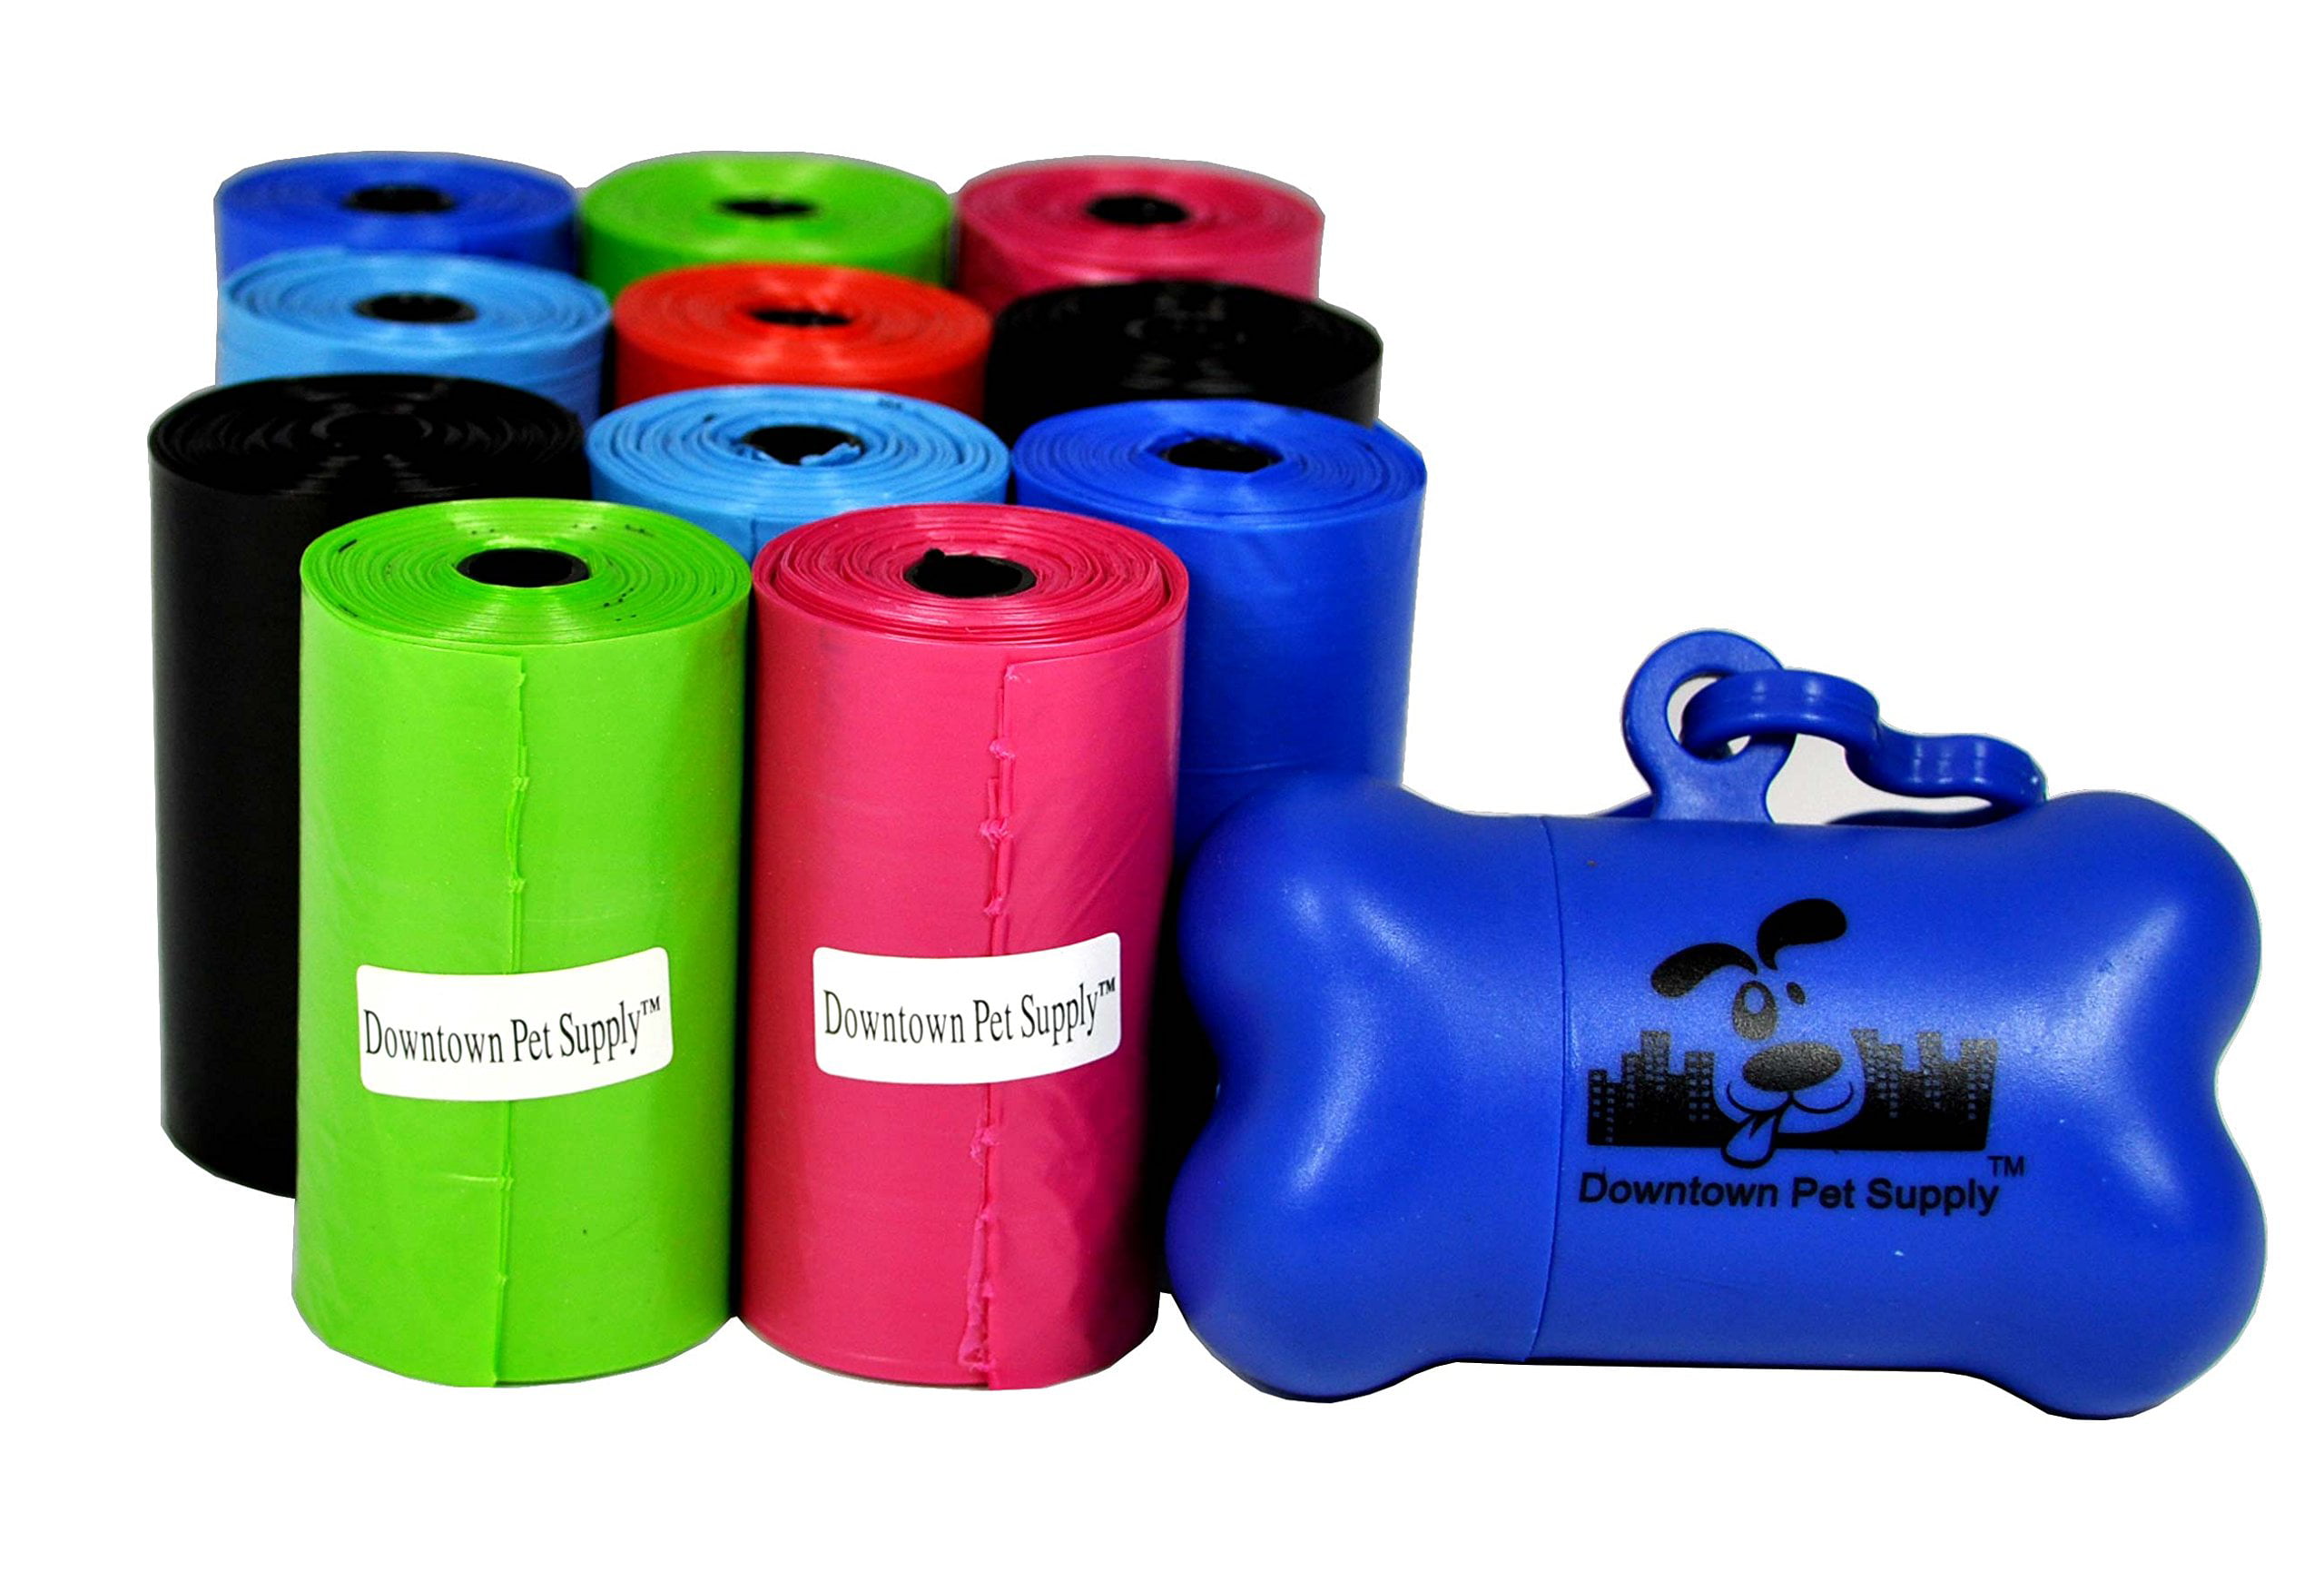 300 Dog Puppy Refill Waste Clean Up Poop Bag Rolls With Core And Bone Dispenser 